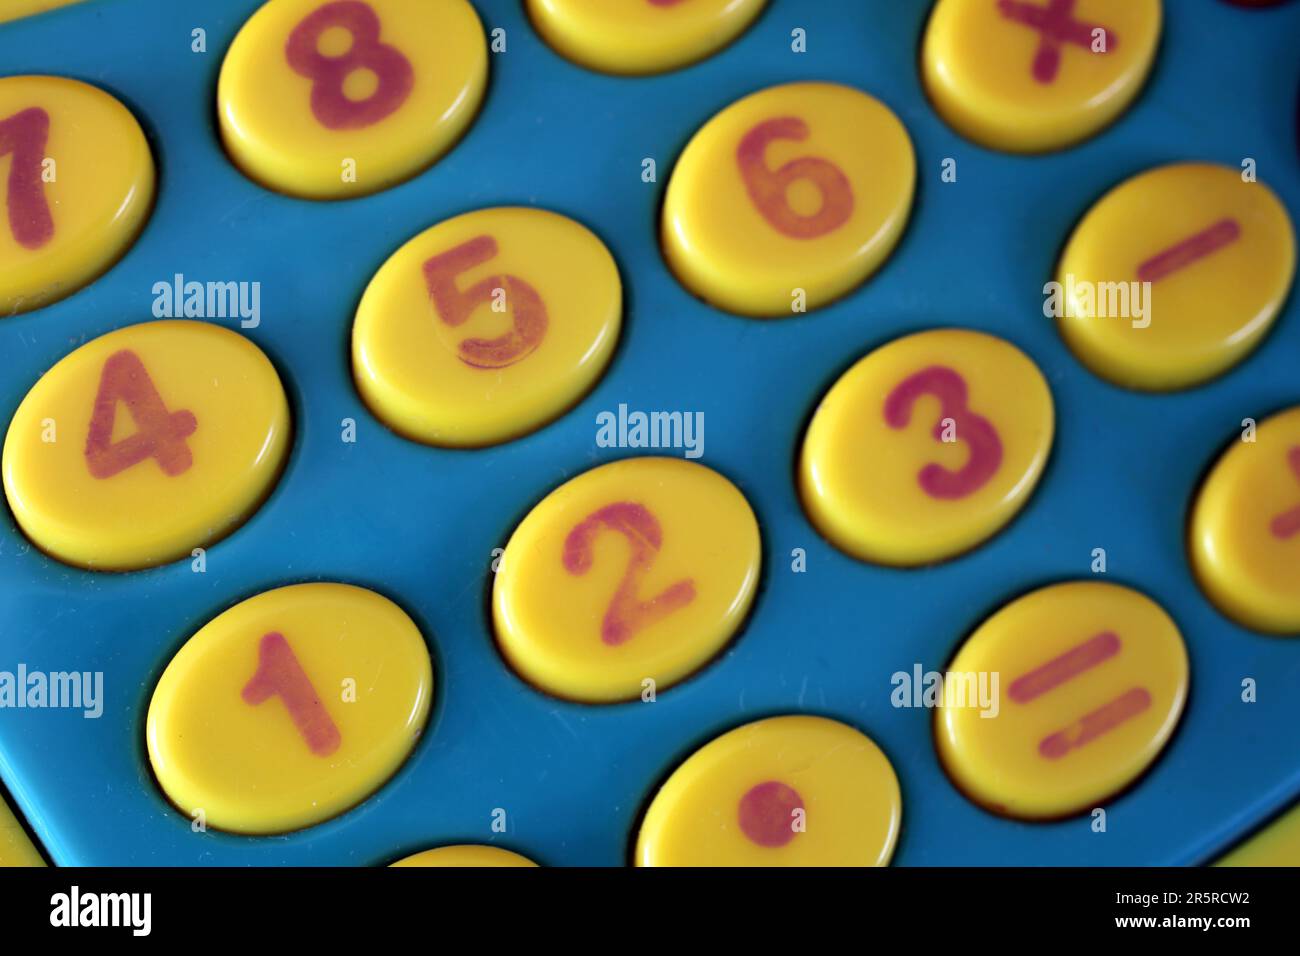 A close up photo of the yellow number keys on a retro toy cash register. Stock Photo